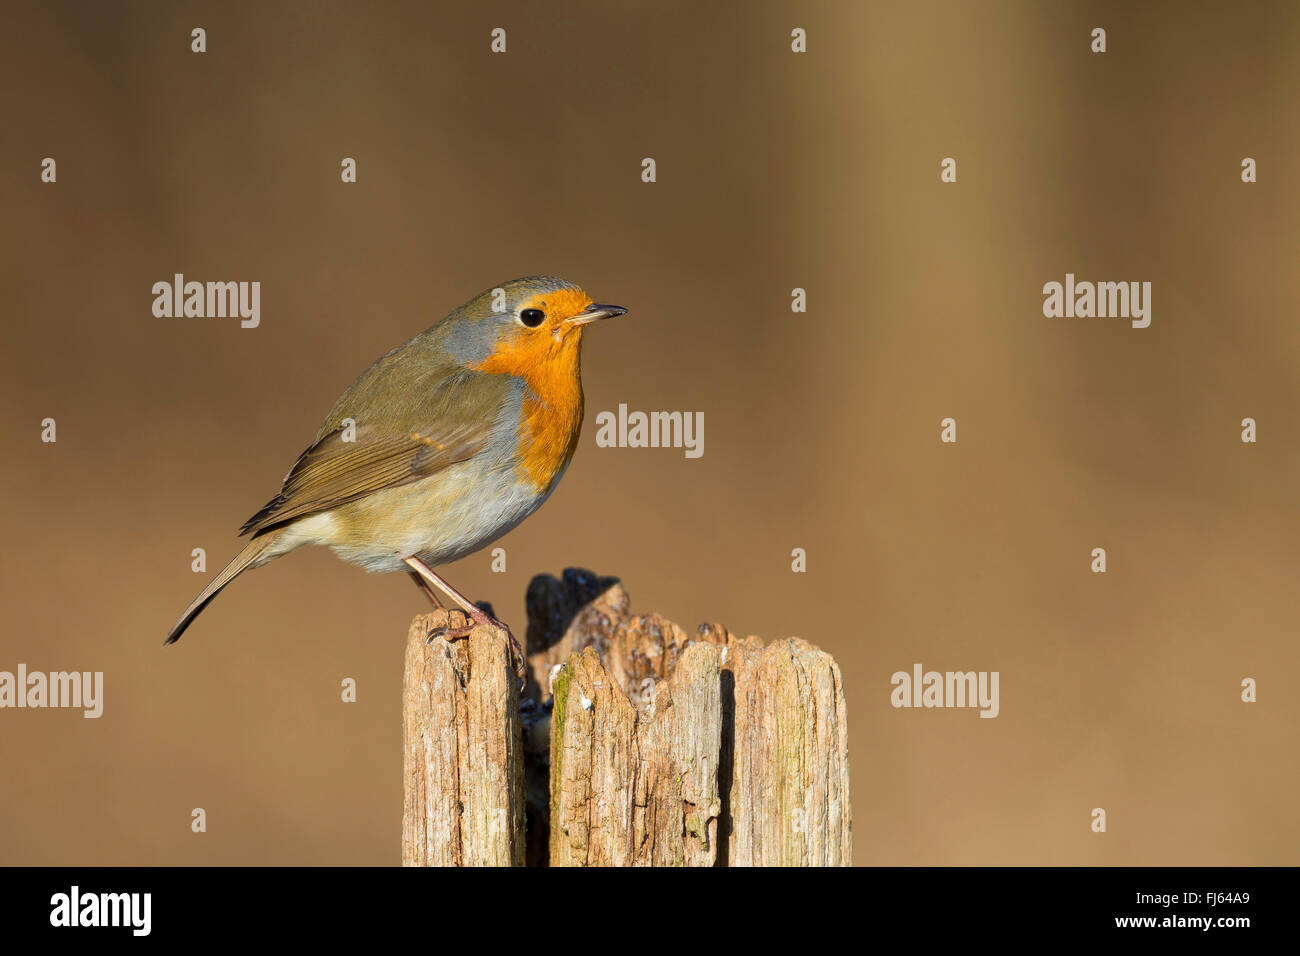 European robin (Erithacus rubecula), sitting on a fencing post, side view, Germany Stock Photo